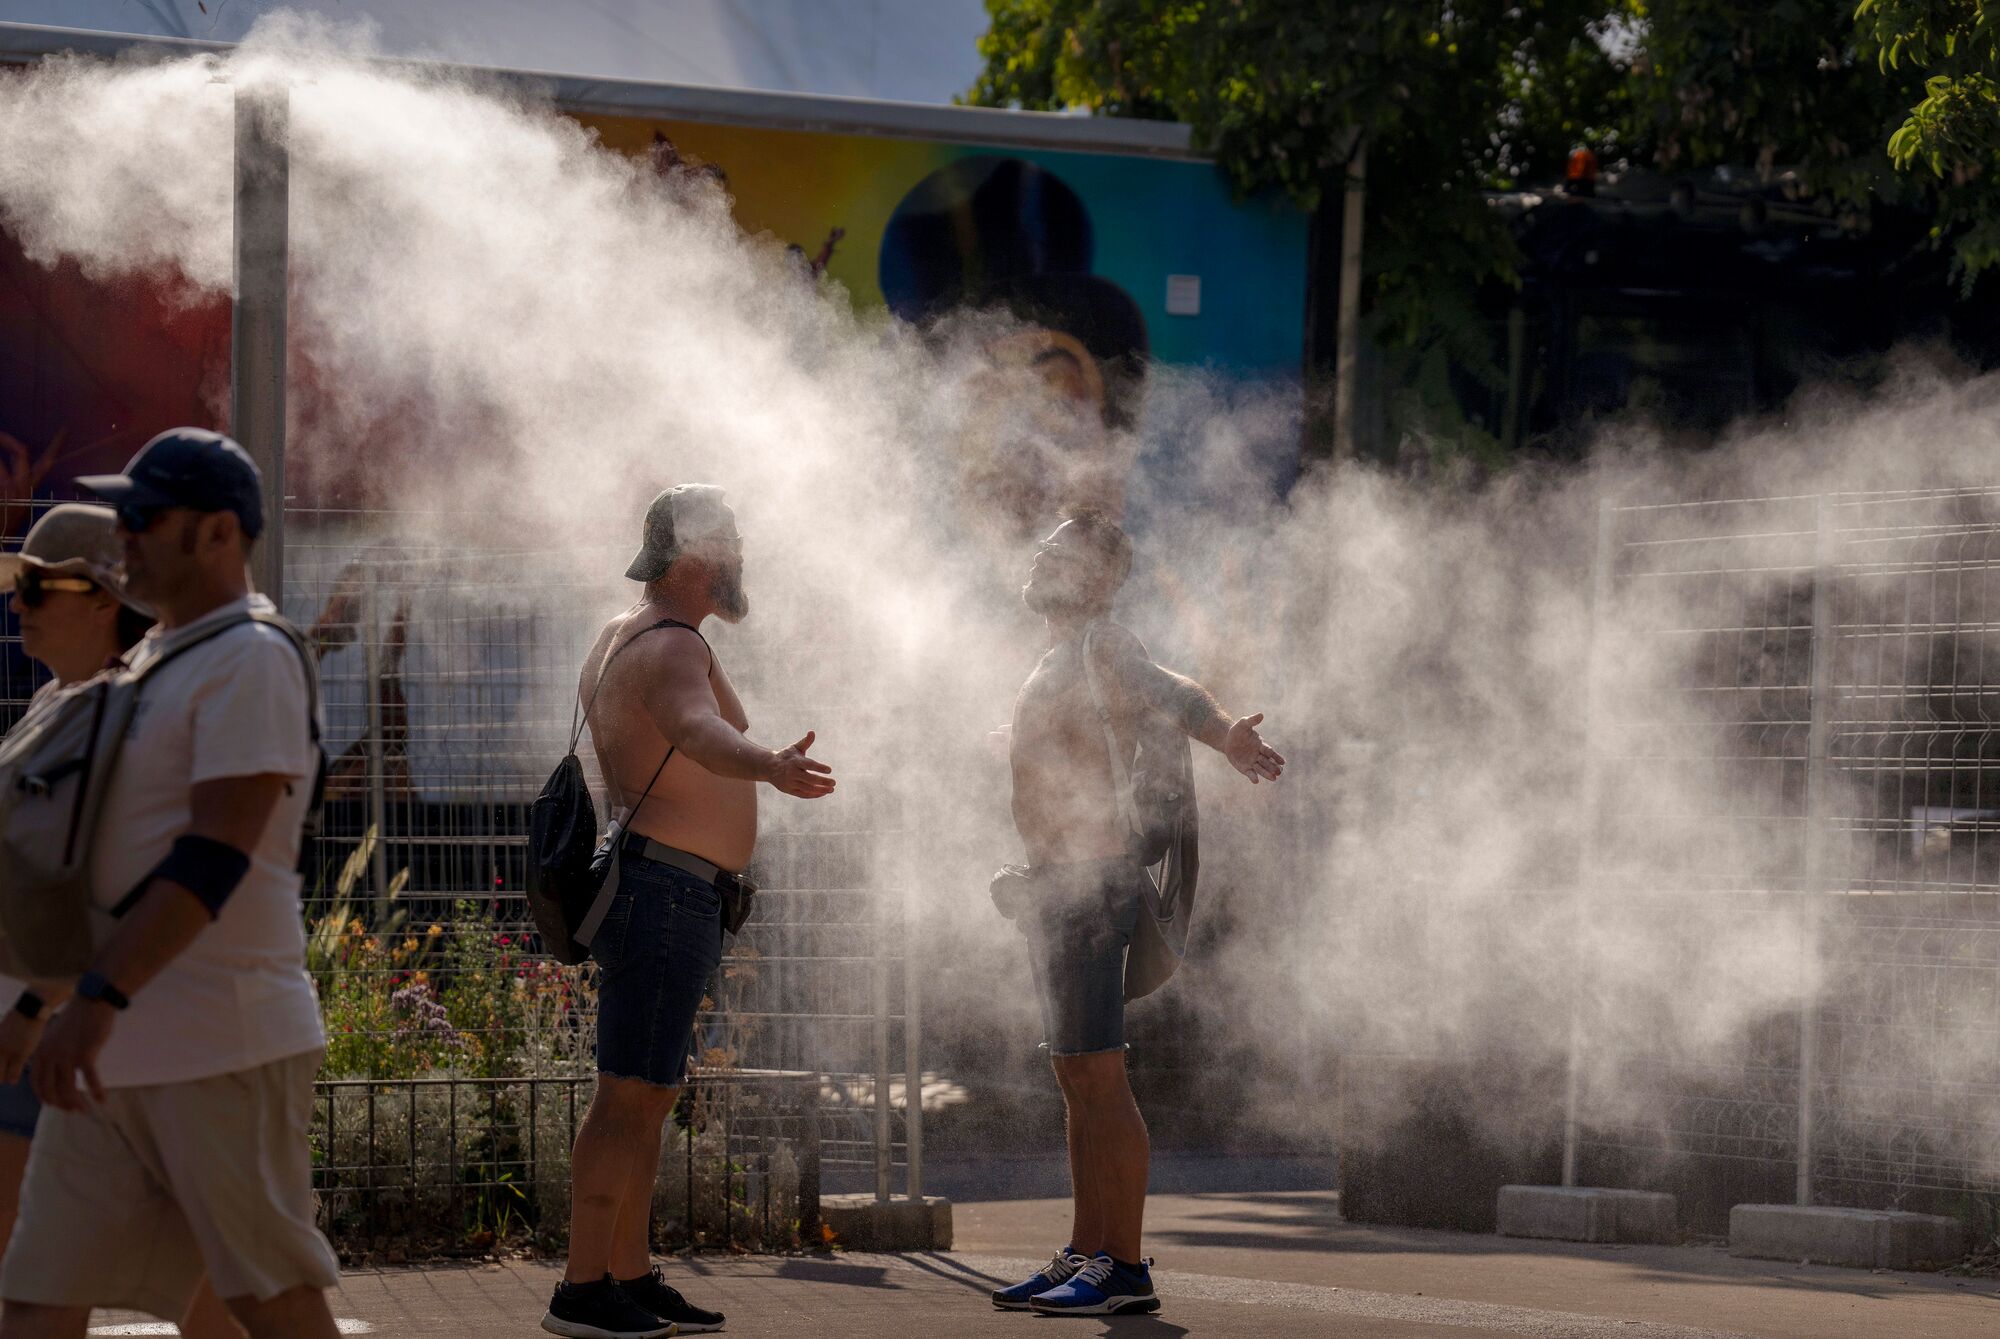 Two men cool themselves with water from a public sprinkler on a hot and sunny day in Barcelona on July 16, 2022, as record-breaking temperatures and wildfires hit Western Europe.